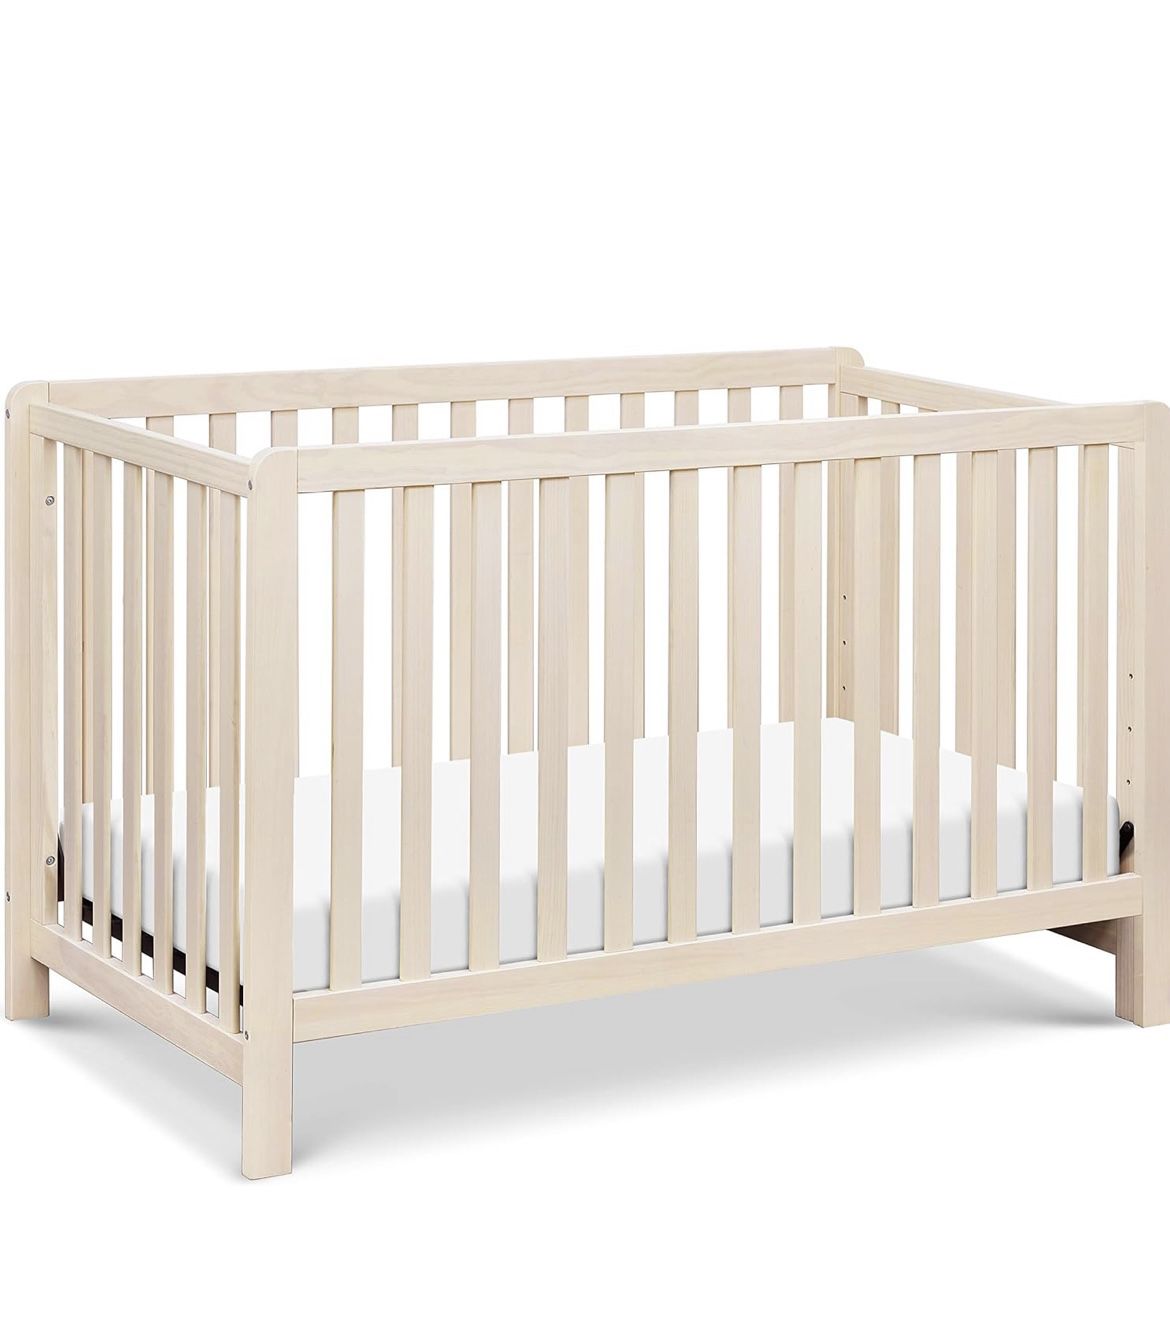 Carter's by DaVinci Colby 4-in-1 Low-Profile Convertible Crib in Washed Natural, Greenguard Gold Certified  Description The Carter's Colby 4-in-1 Conv